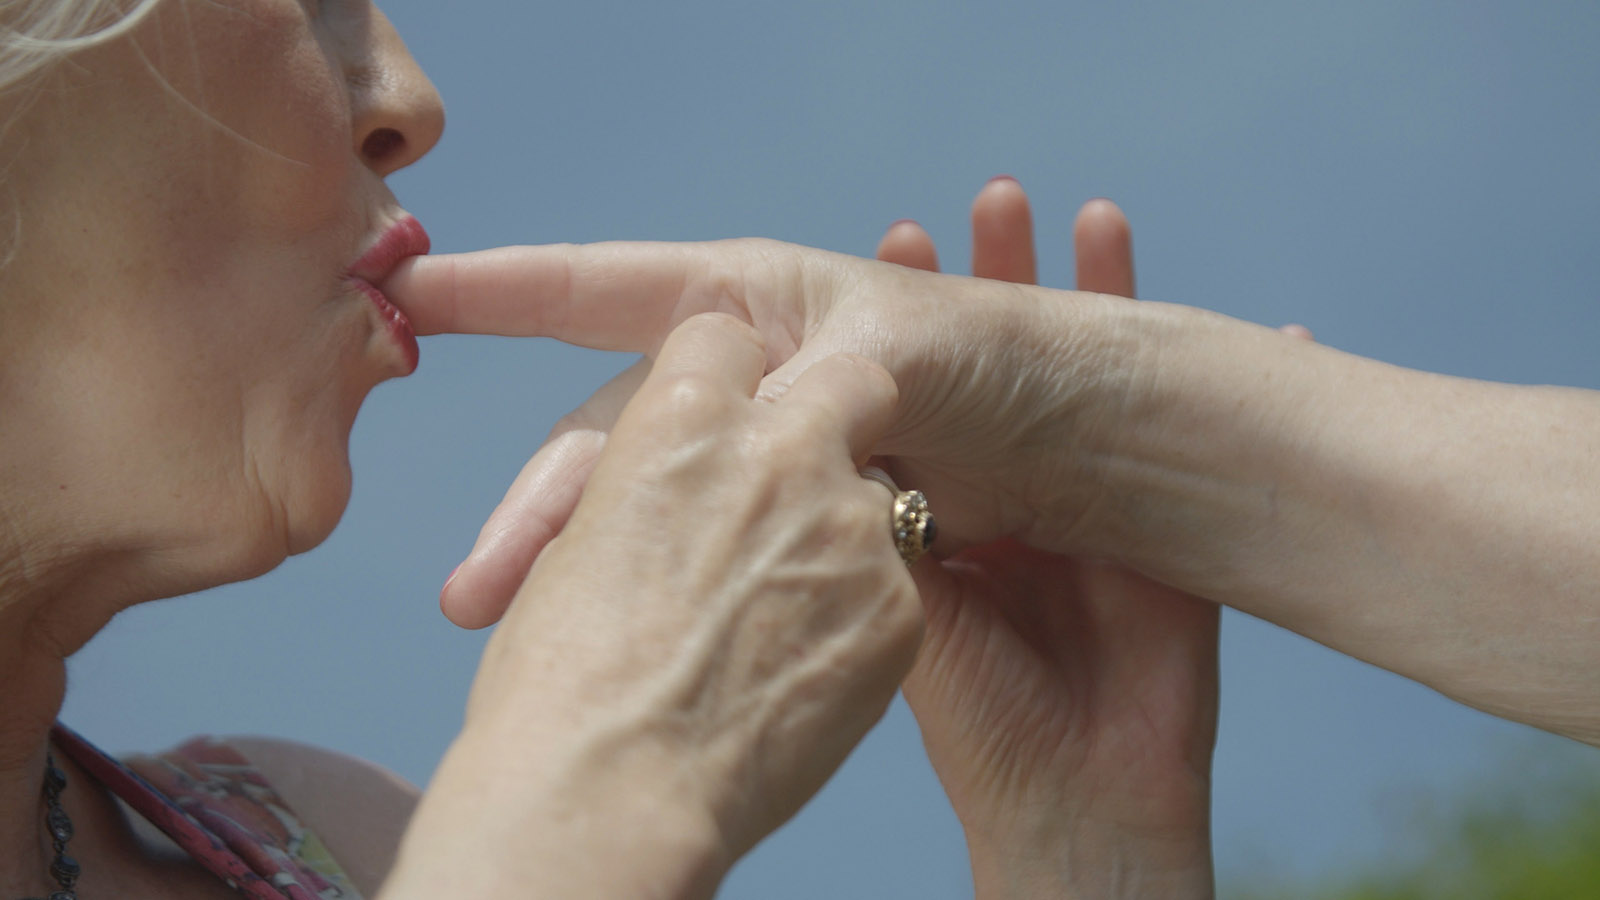 The picture shows the lower part of an older white woman's face and a white hand, whose index finger she is sucking. Her lips are painted pink.